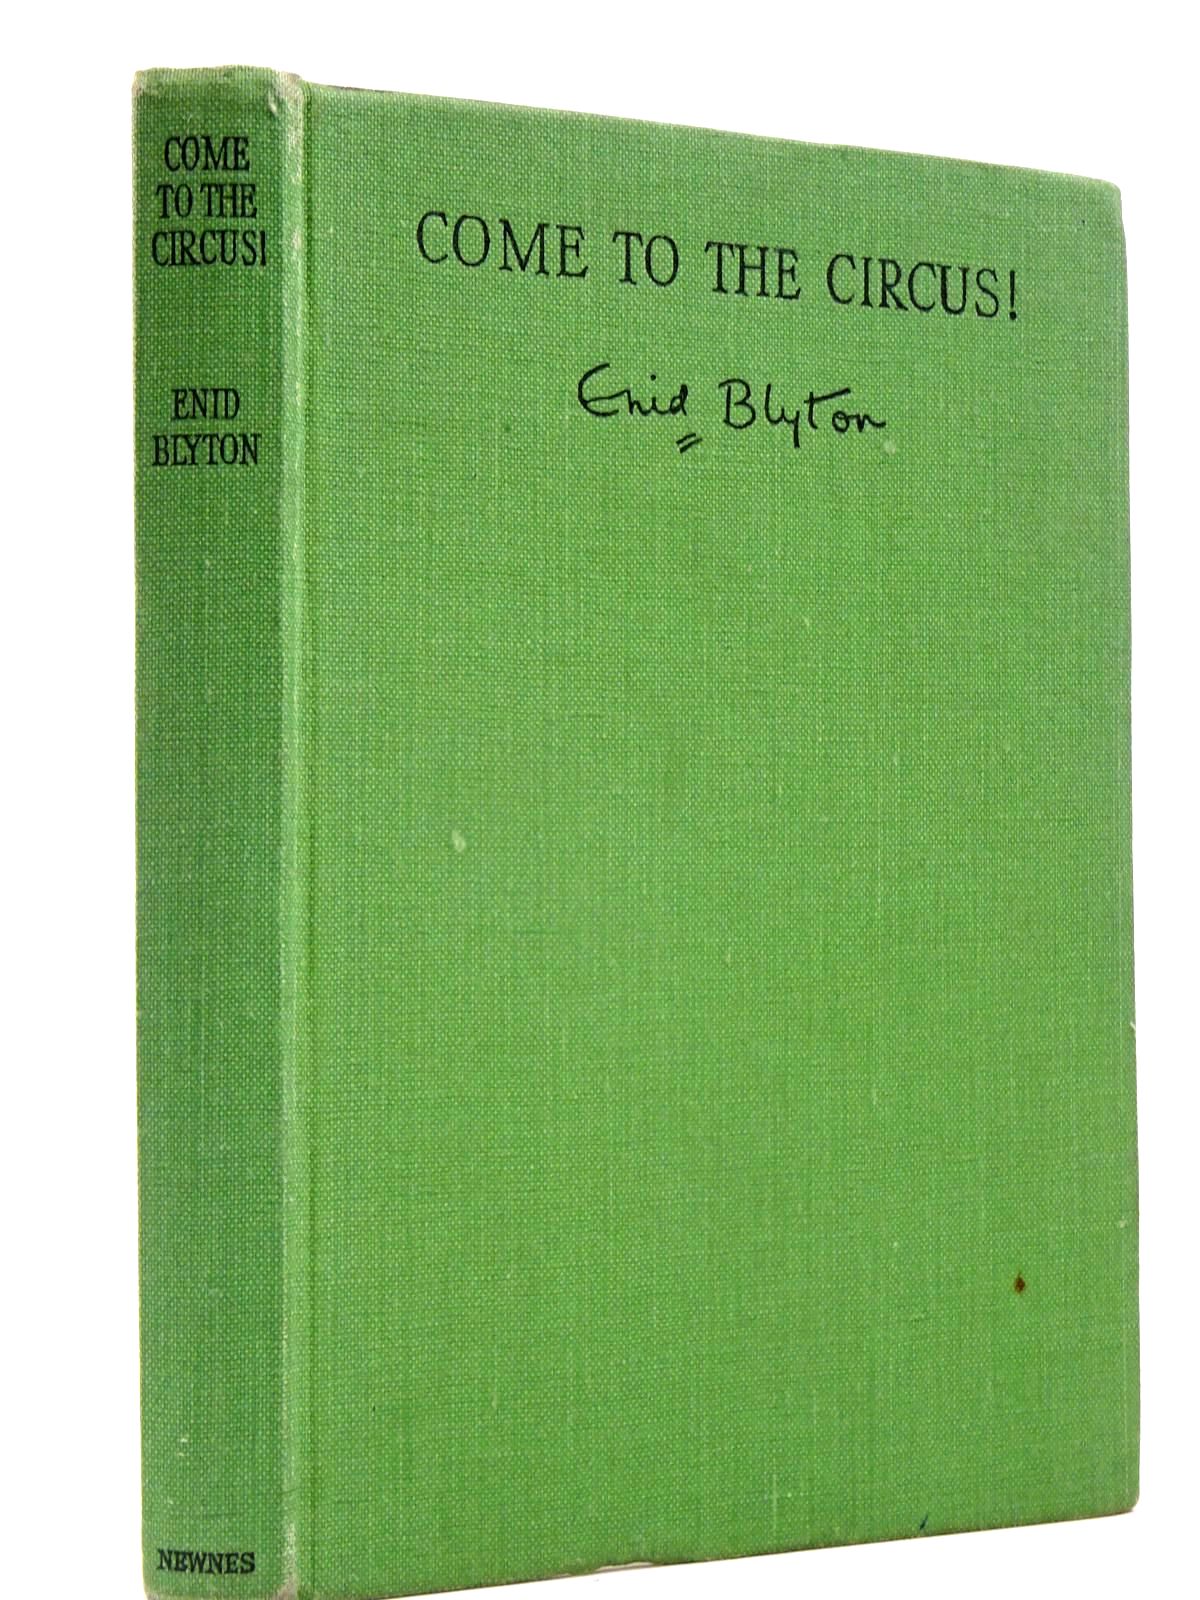 Photo of COME TO THE CIRCUS! written by Blyton, Enid illustrated by Johnson, Joyce published by George Newnes Ltd. (STOCK CODE: 2130176)  for sale by Stella & Rose's Books